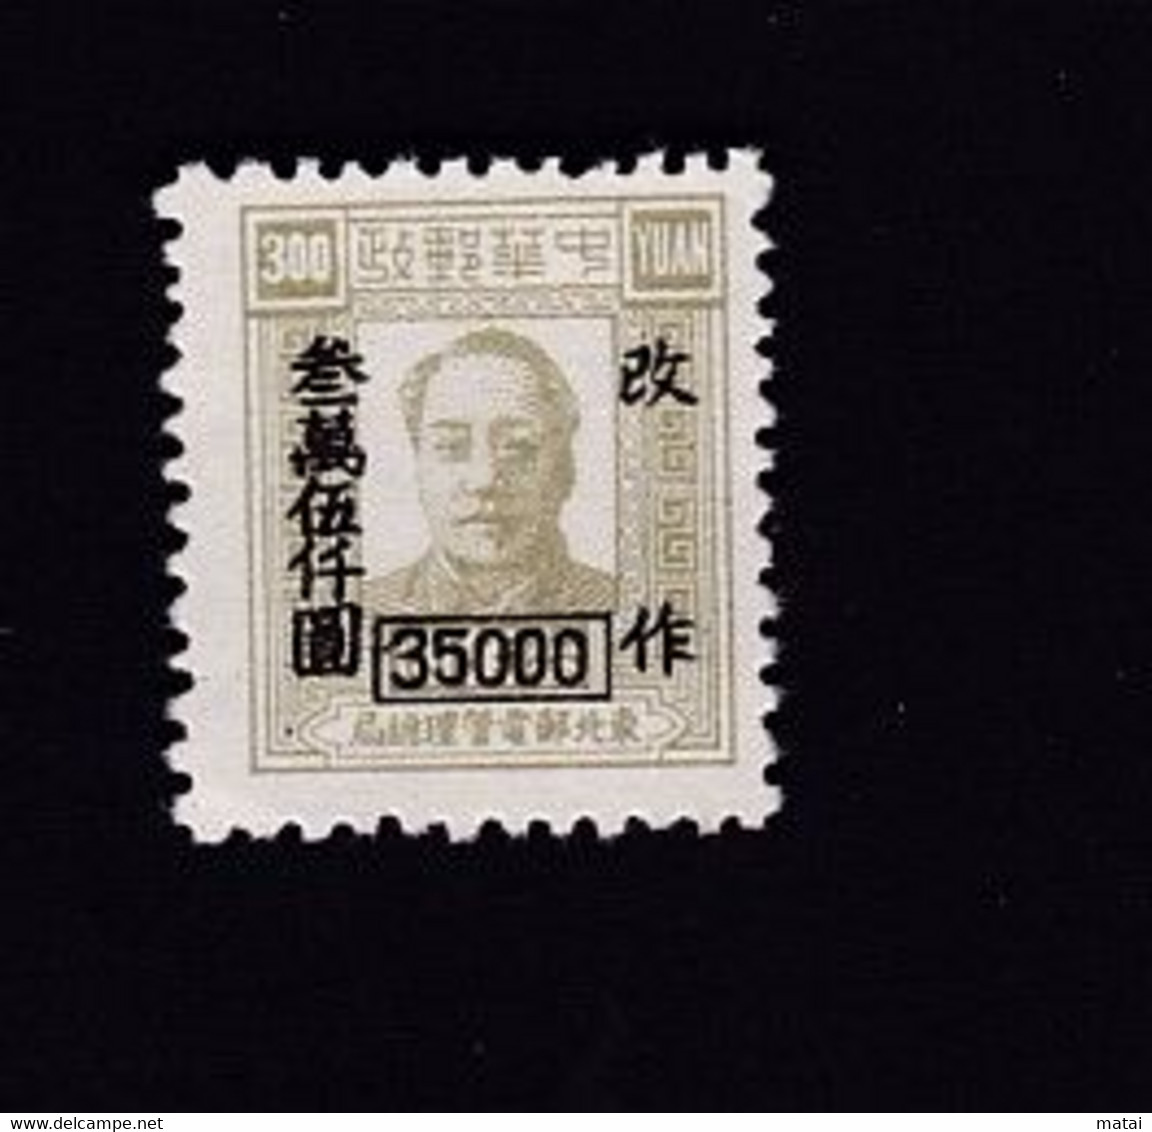 CHINA CINE CINA  THE CHINESE PEOPLE'S REVOLUTIONARY WAR PERIOD NORTHEAST PEOPLE'S POSTS STAMP - Cina Centrale 1948-49